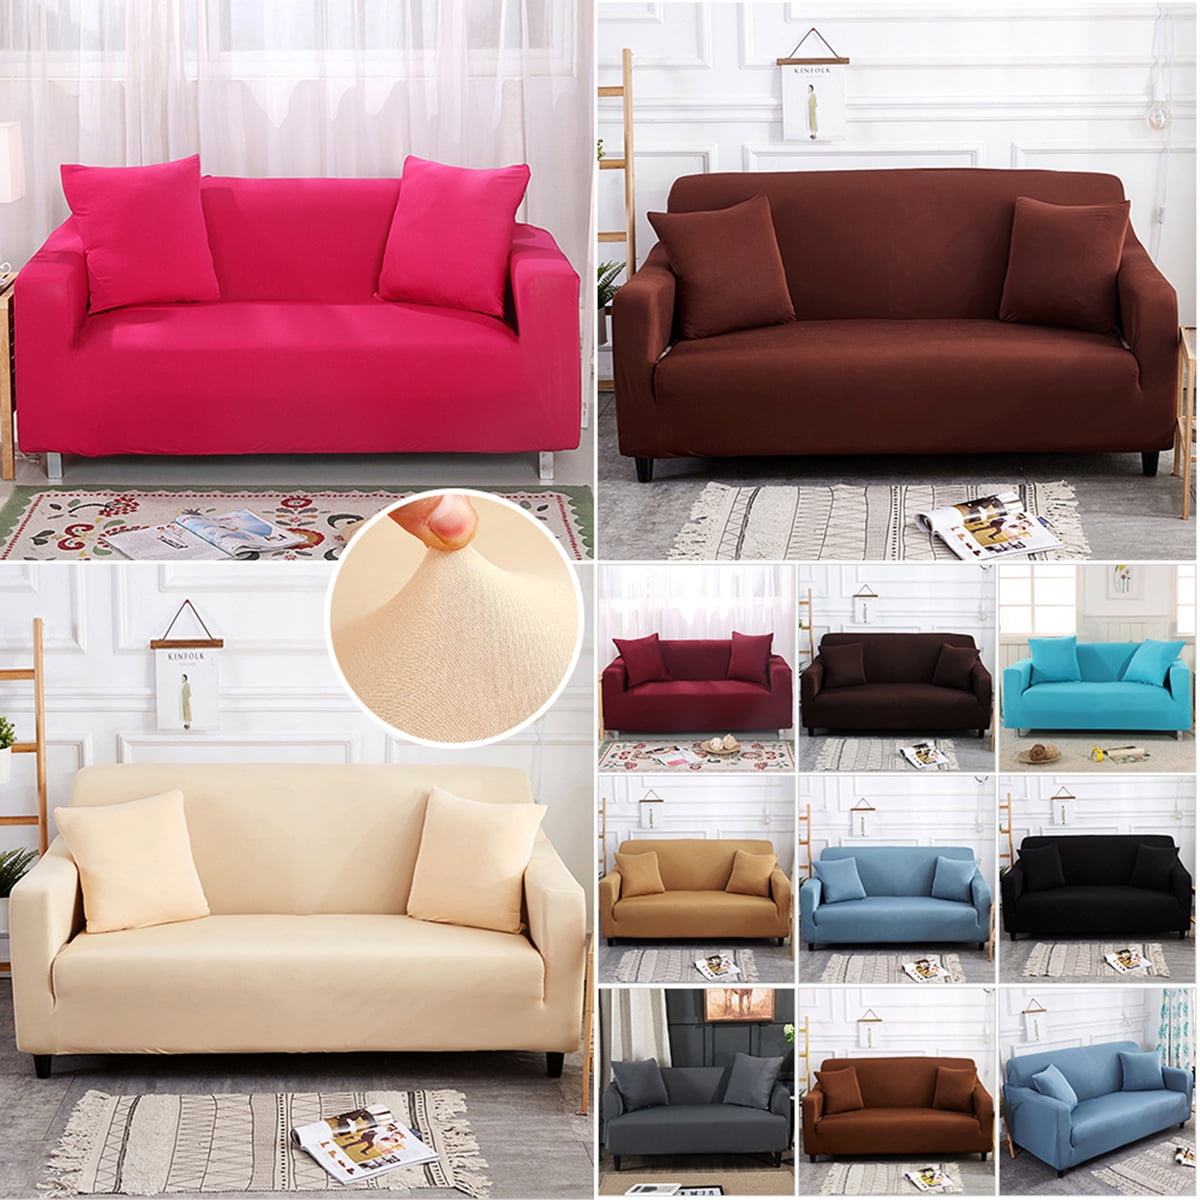 Details about   Washable Sofa Slipcover Stretchy Couch Cover Cushion Protector Decor 1-4 Seater 